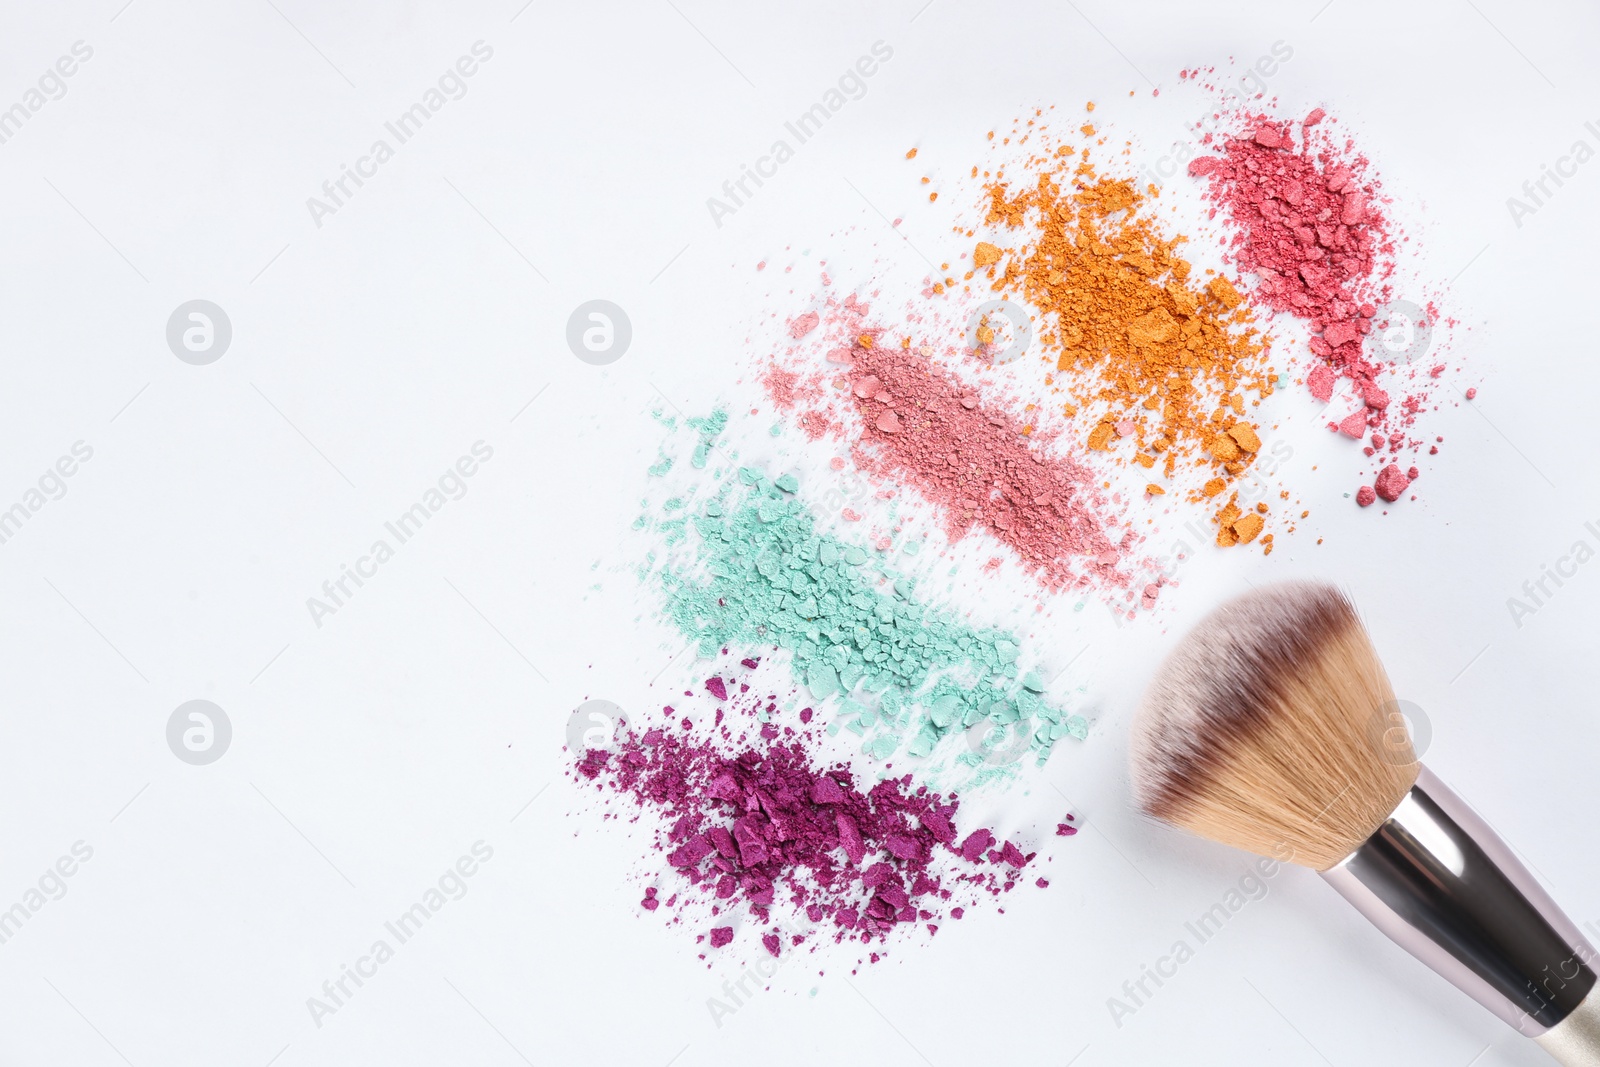 Photo of Makeup brush and scattered eye shadows on white background, flat lay. Space for text